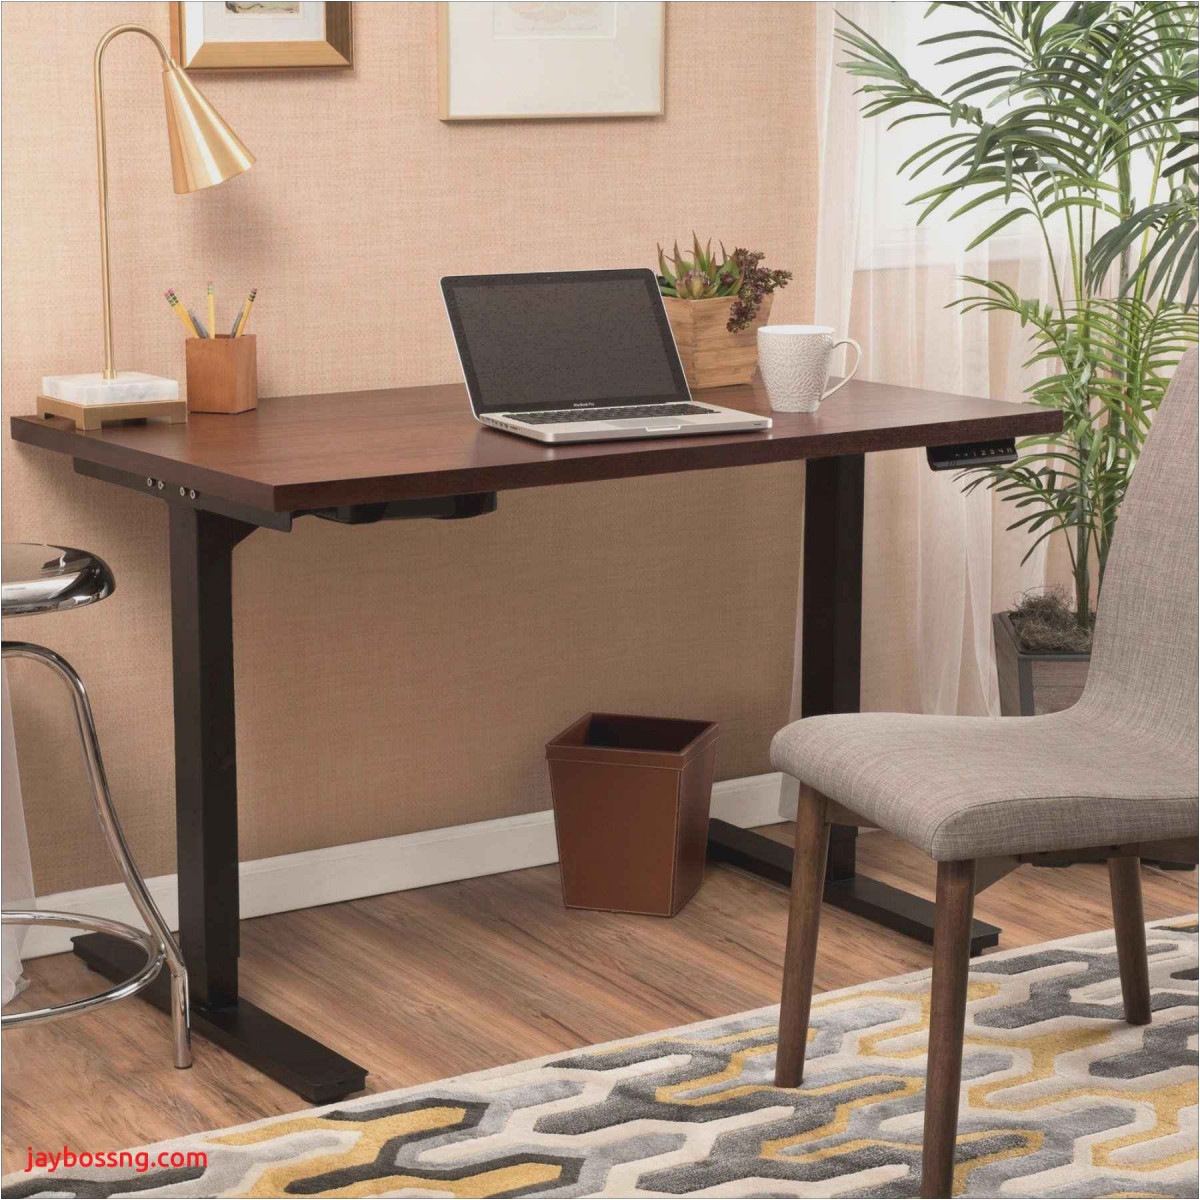 painted furniture for sale awesome 2019 black fice desk for sale best home fice furniture images